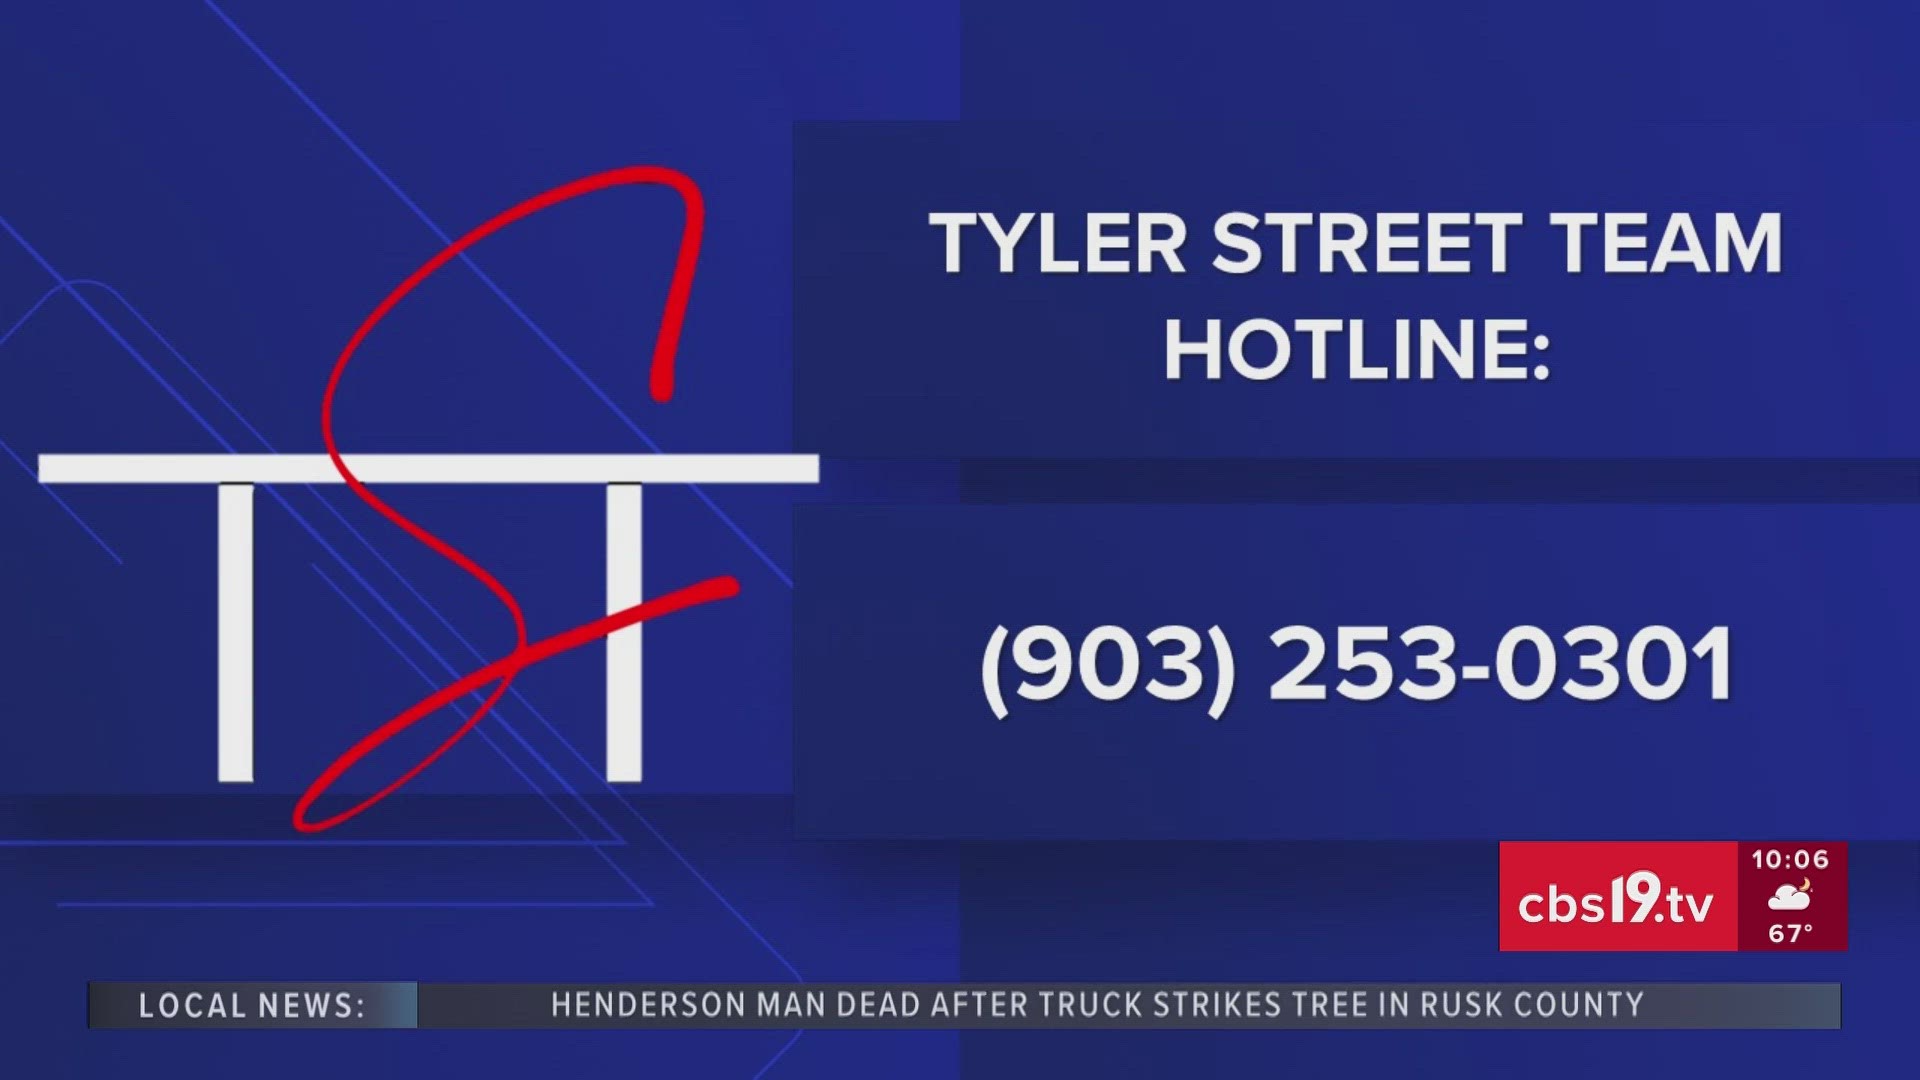 The Tyler Street Team, Salvation Army and PATH are taking initiative to make sure people without a home stay warm when temperatures drop below freezing.